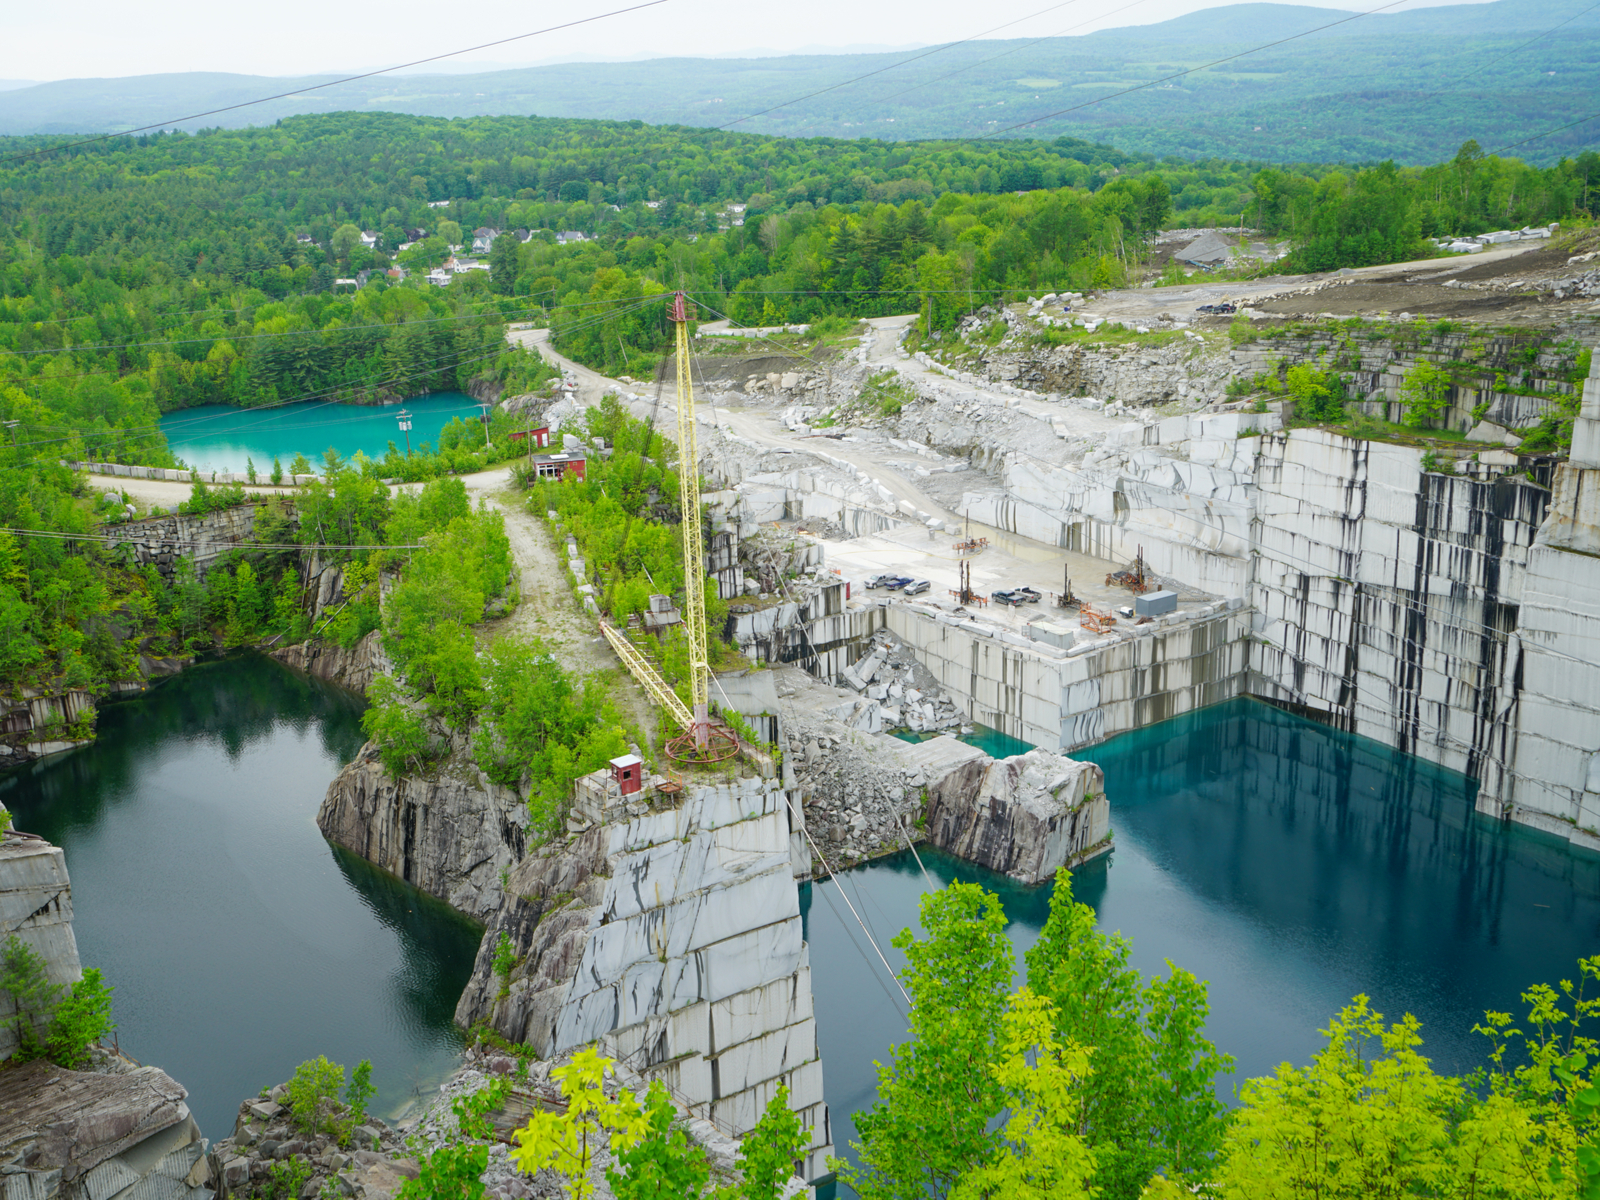 Rock of ages quarry, one of our top picks for things to do in Vermont